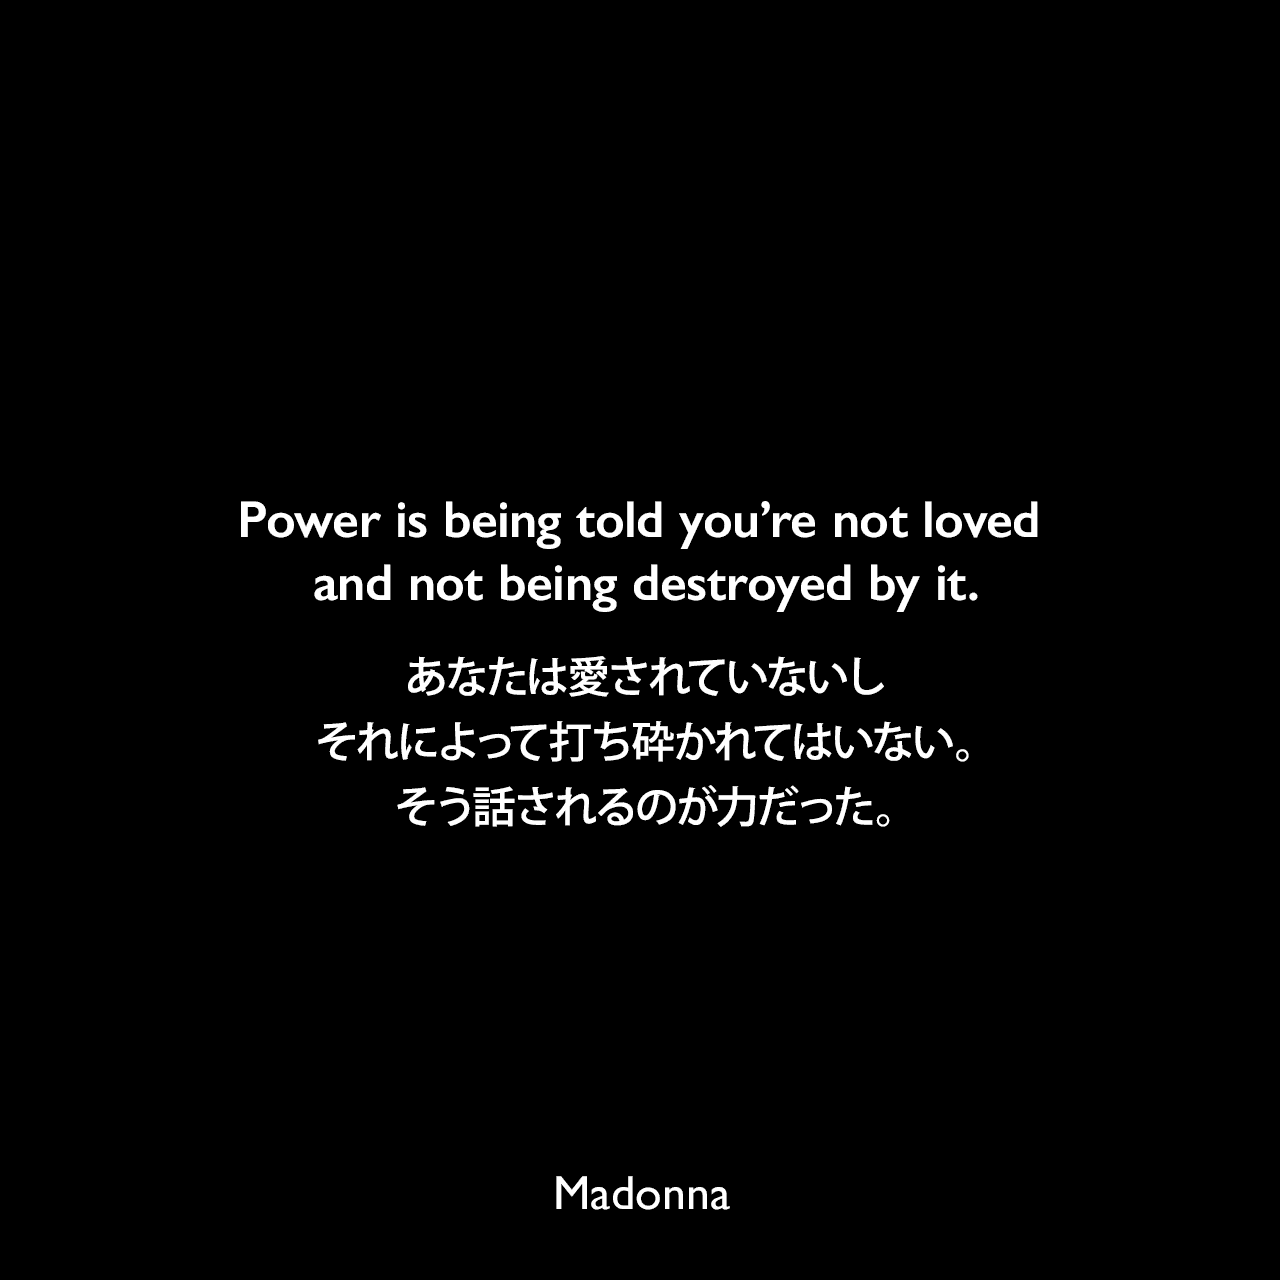 Power is being told you’re not loved and not being destroyed by it.あなたは愛されていないしそれによって打ち砕かれてはいない。そう話されるのが力だった。Madonna